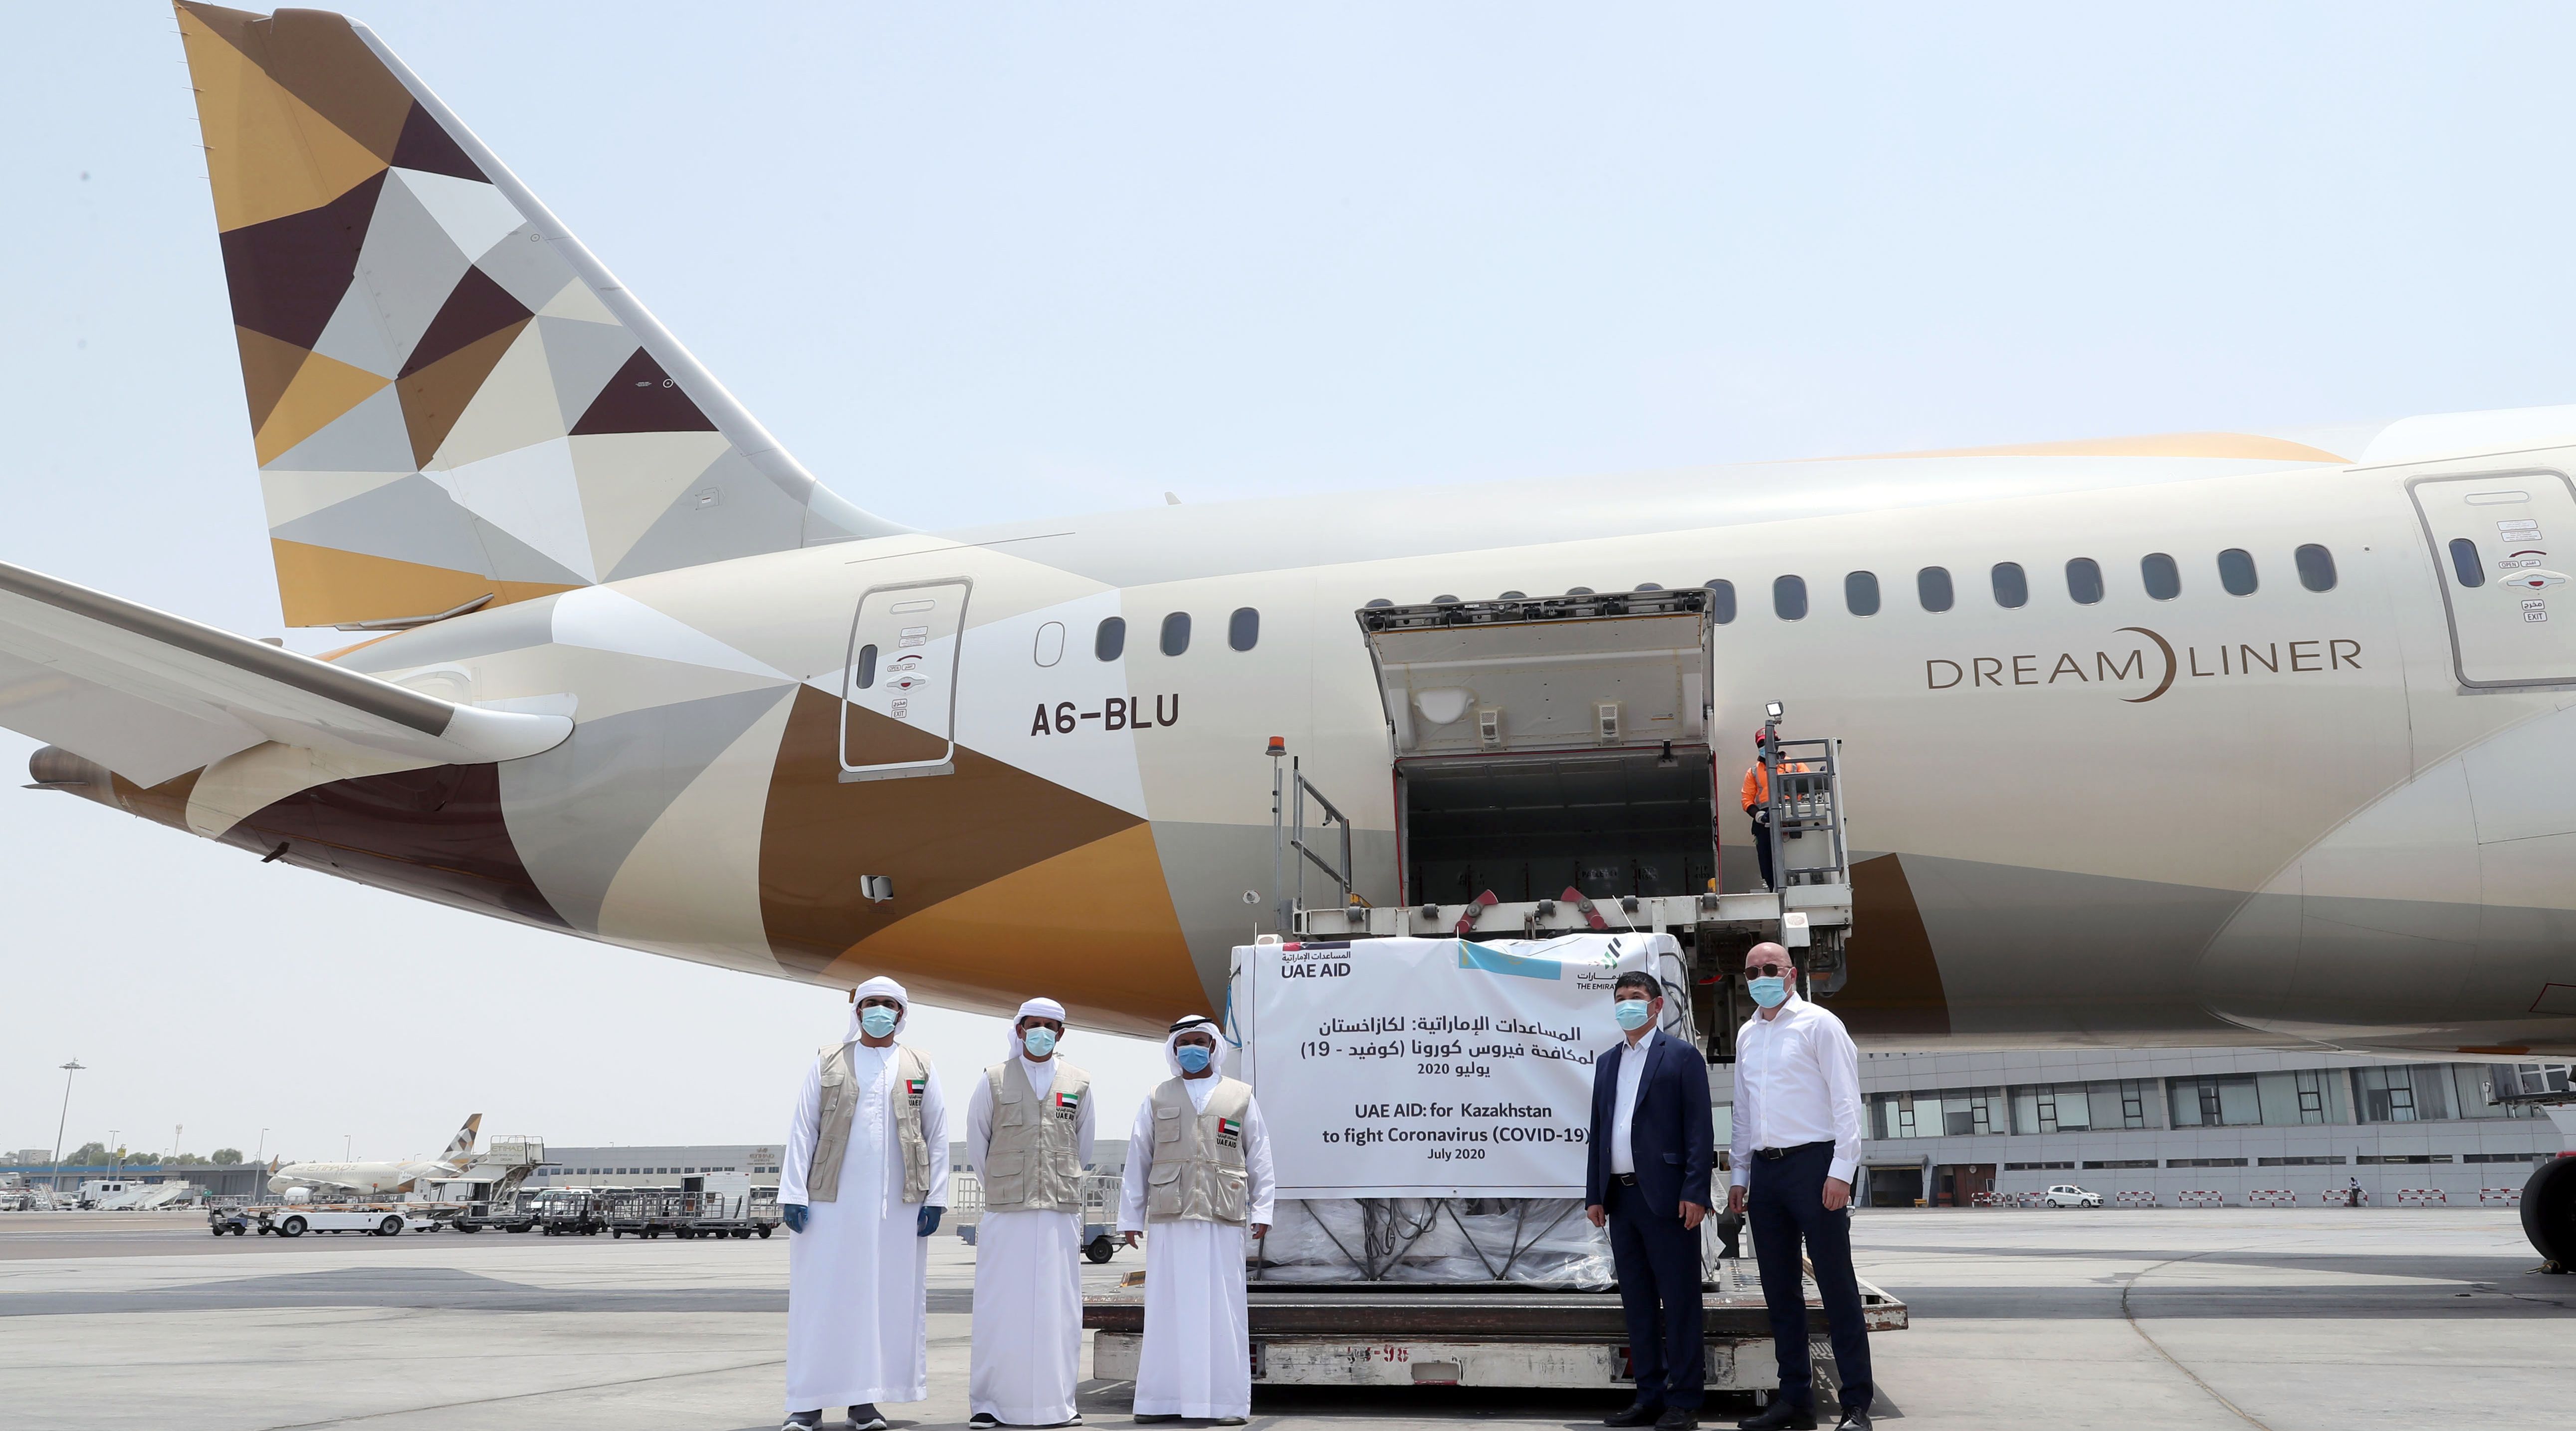 COVID-19 response: UAE sends additional medical supplies to Kazakhstan